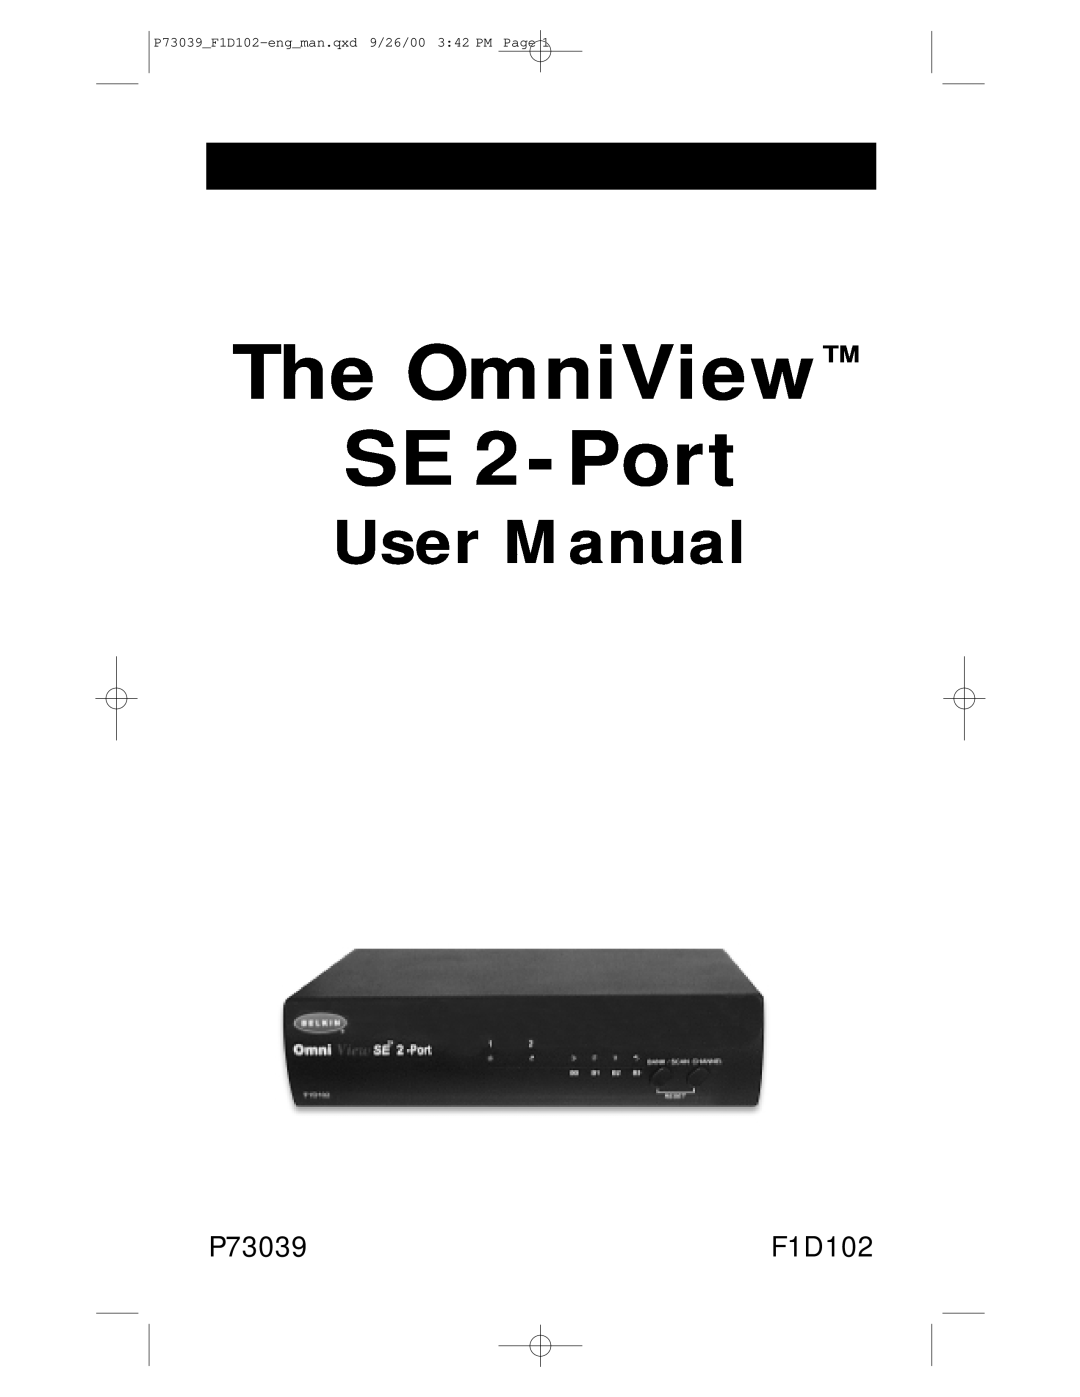 Belkin user manual The OmniView SE 2-Port, P73039F1D102-engman.qxd 9/26/00 342 PM Page 